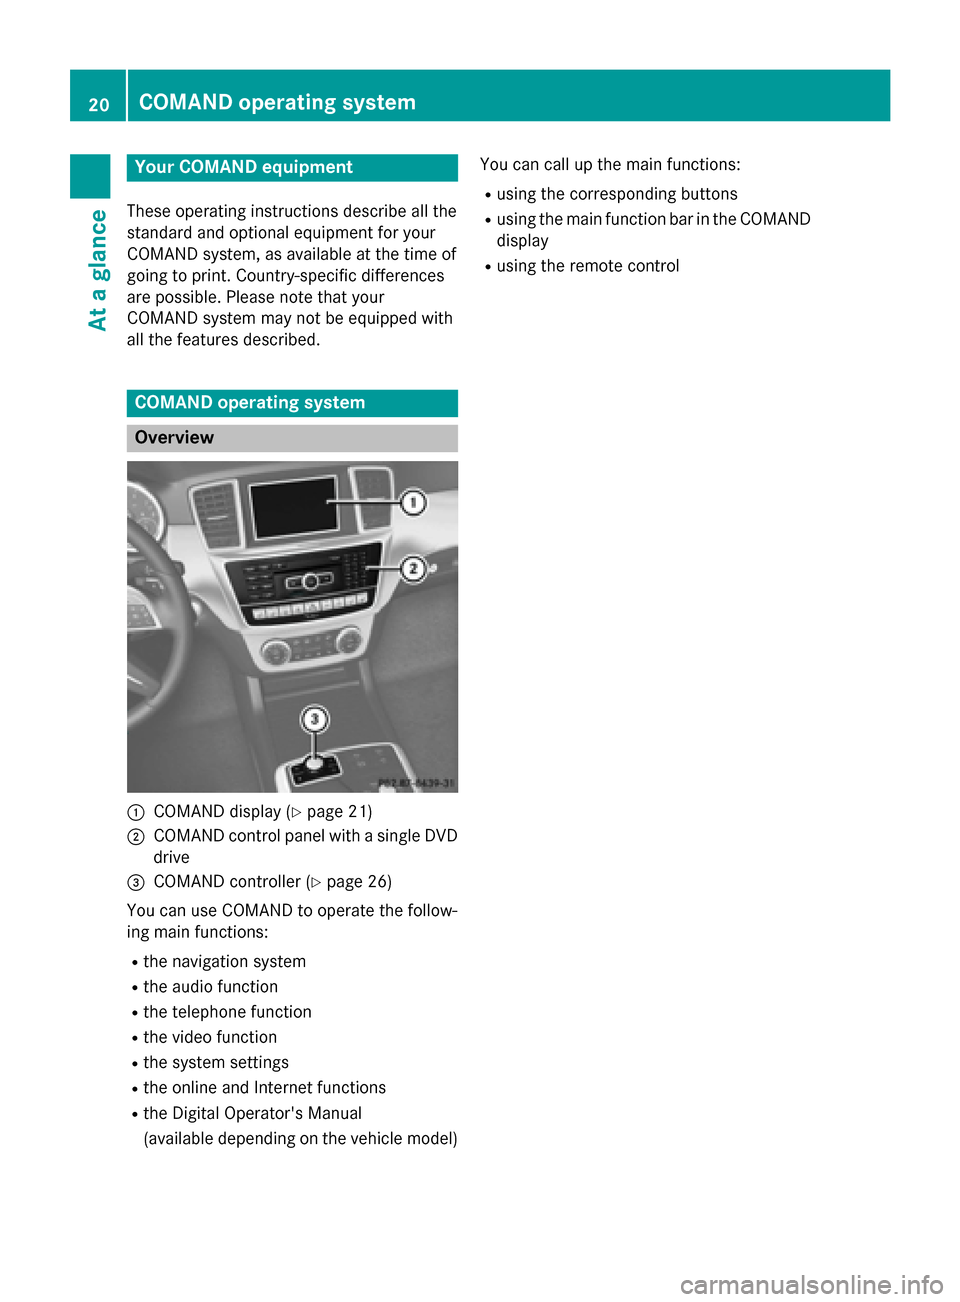 MERCEDES-BENZ B-Class 2015 W246 Comand Manual Your COMAND equipment
These operating instructions describe all the
standard and optional equipment for your
COMAND system, as available at the time of
going to print. Country-specific differences
are